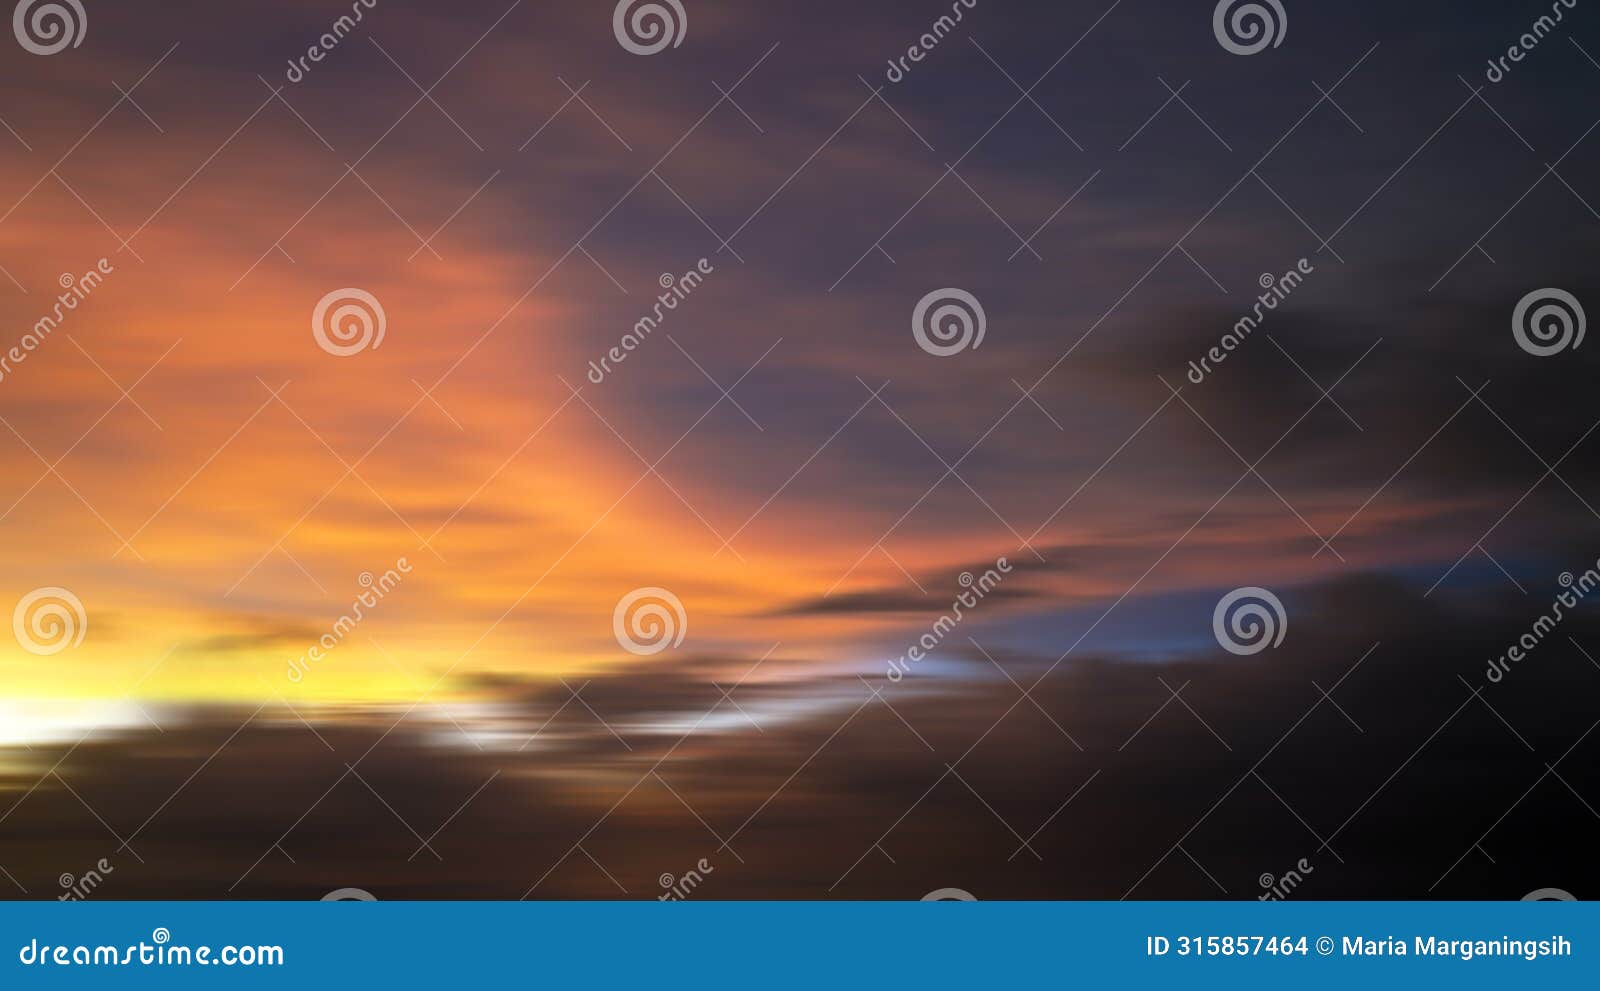 blur background of the sunset sky with colorful clouds. dramatic sky at magic hours.